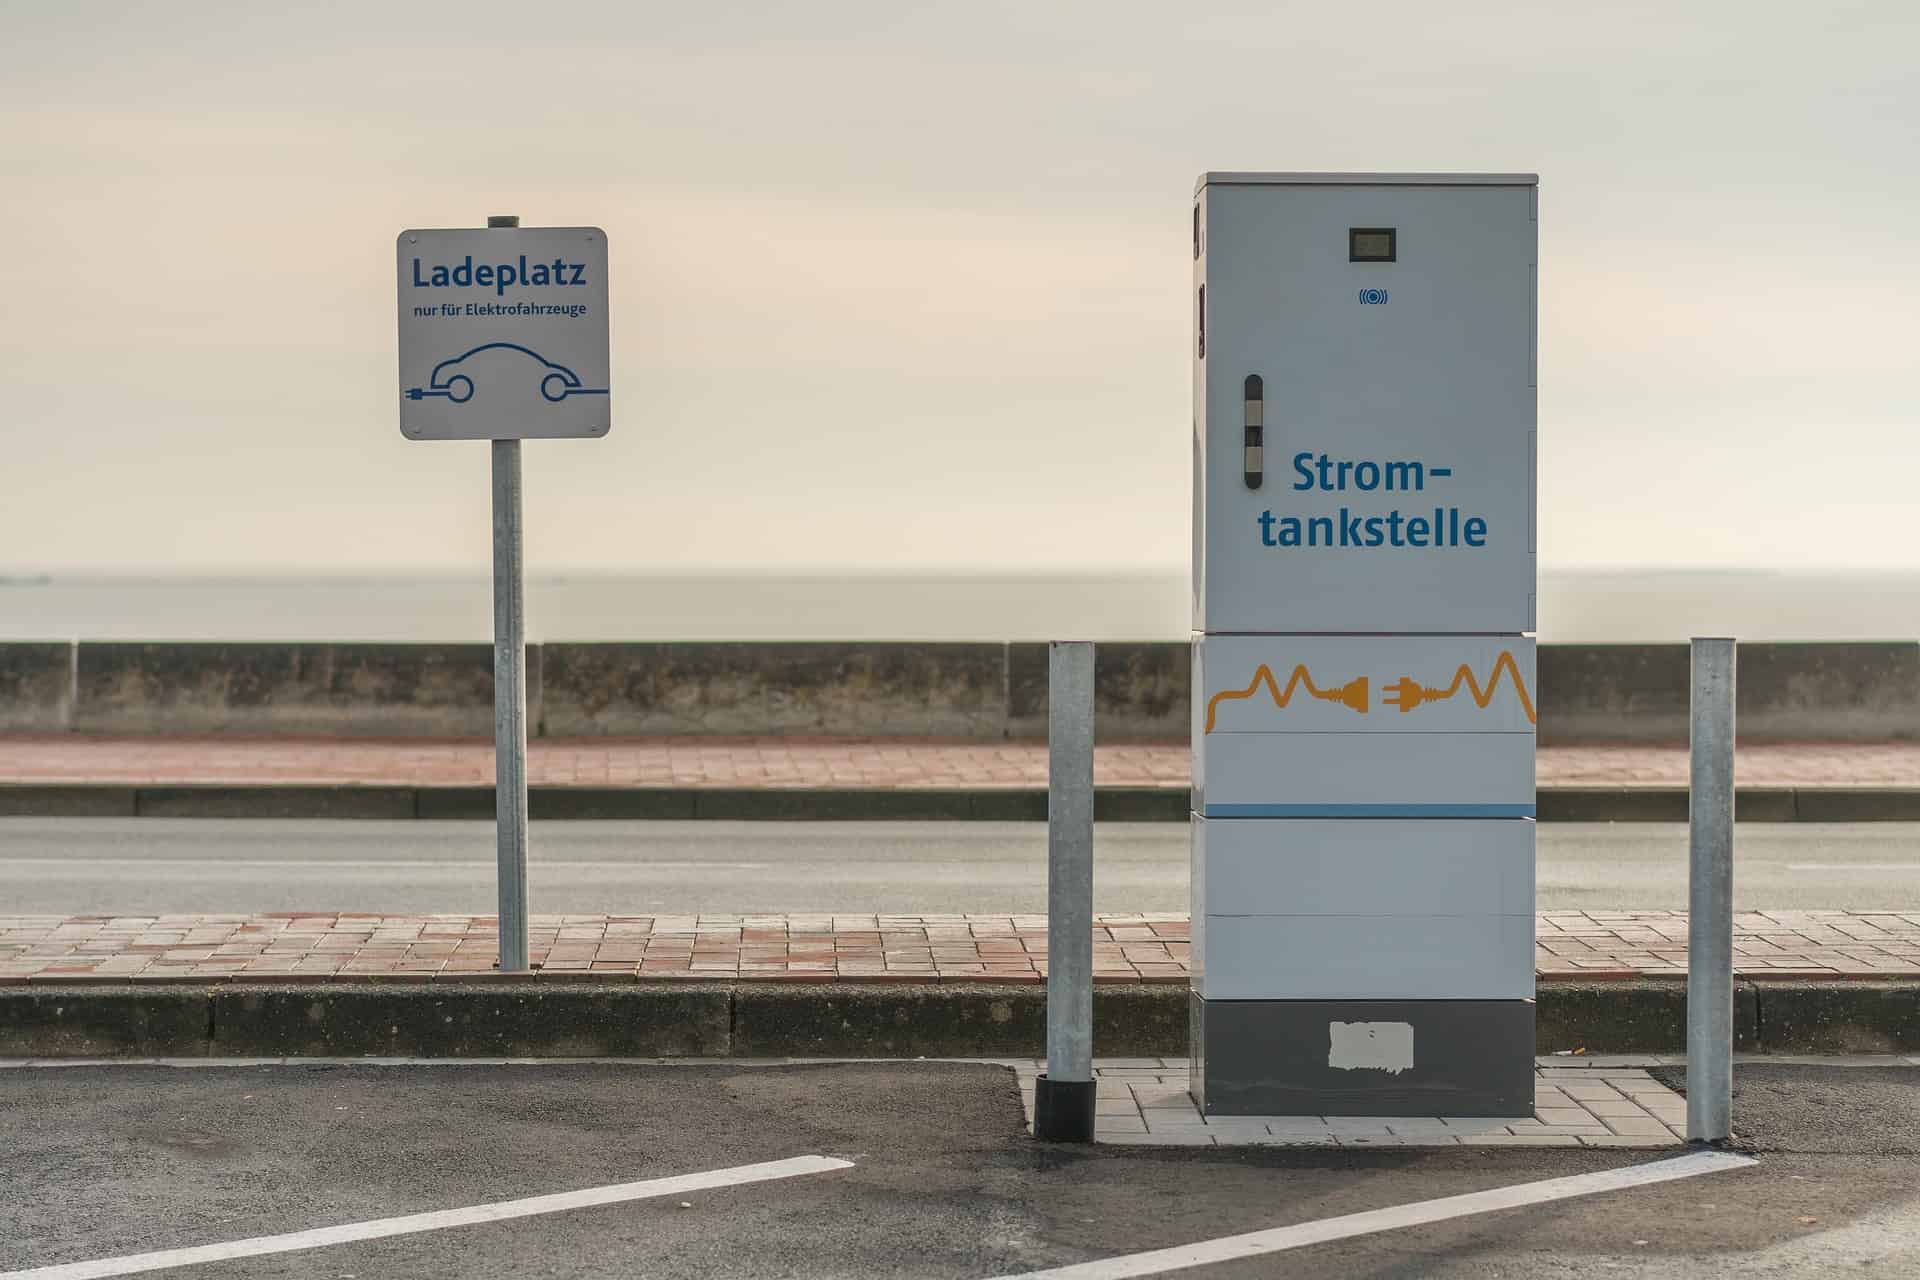 Germany allocates €6.3 billion for 930,000 more charging stations by 2030